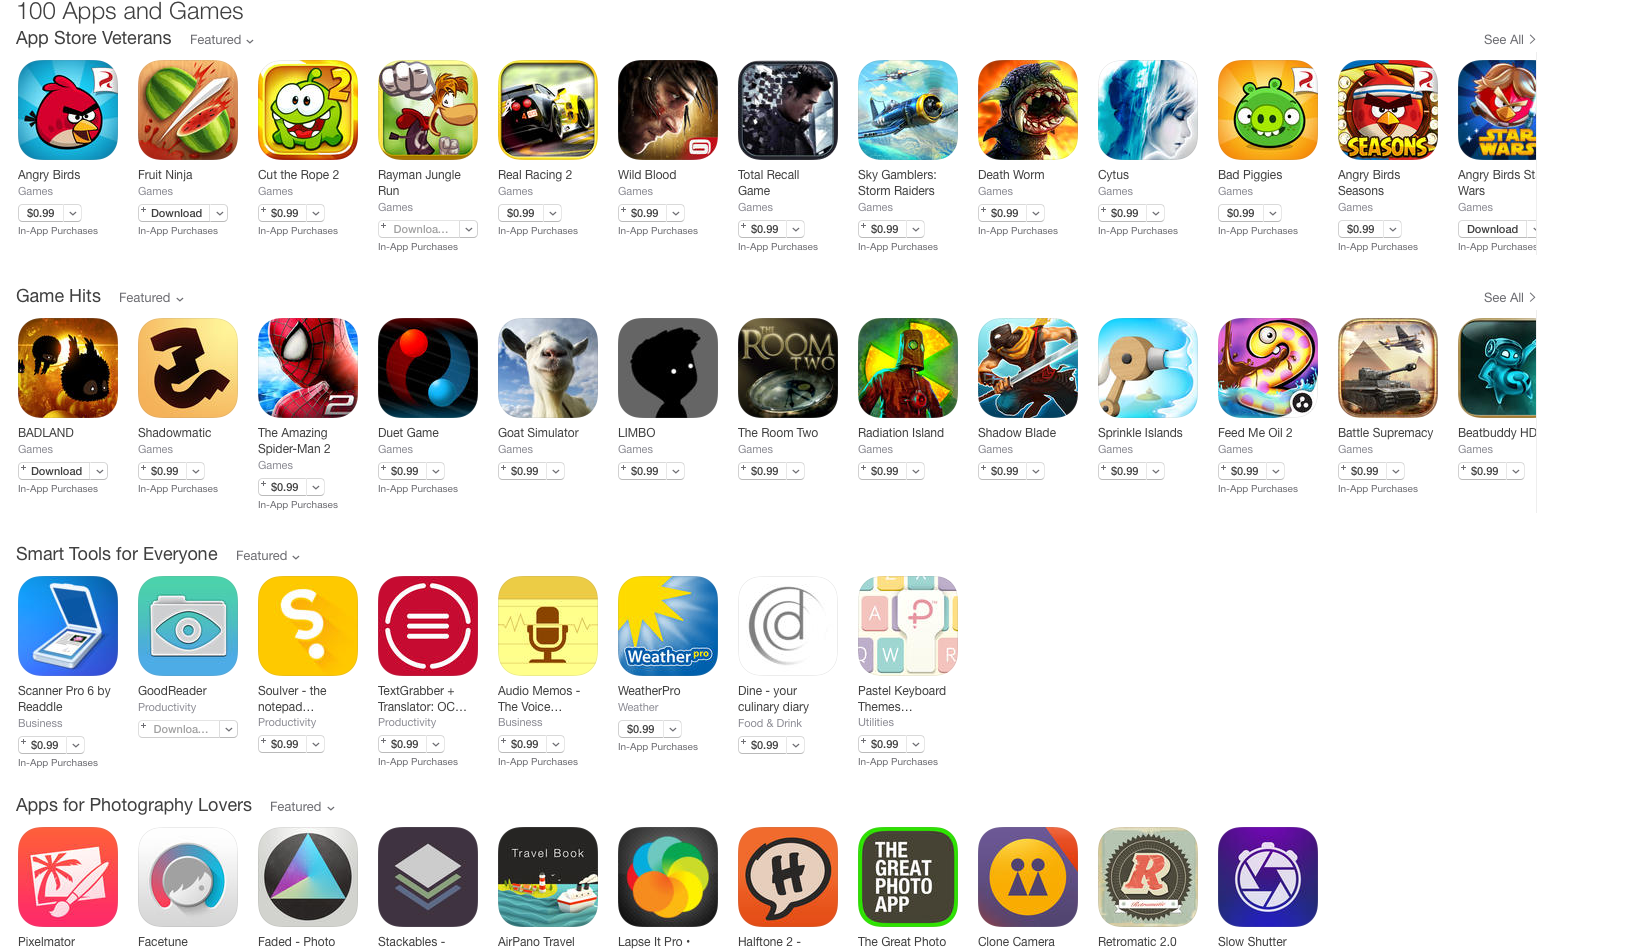 Apple posts a huge '100 Apps & Games' promo, great iOS titles go on sale for just $0.99